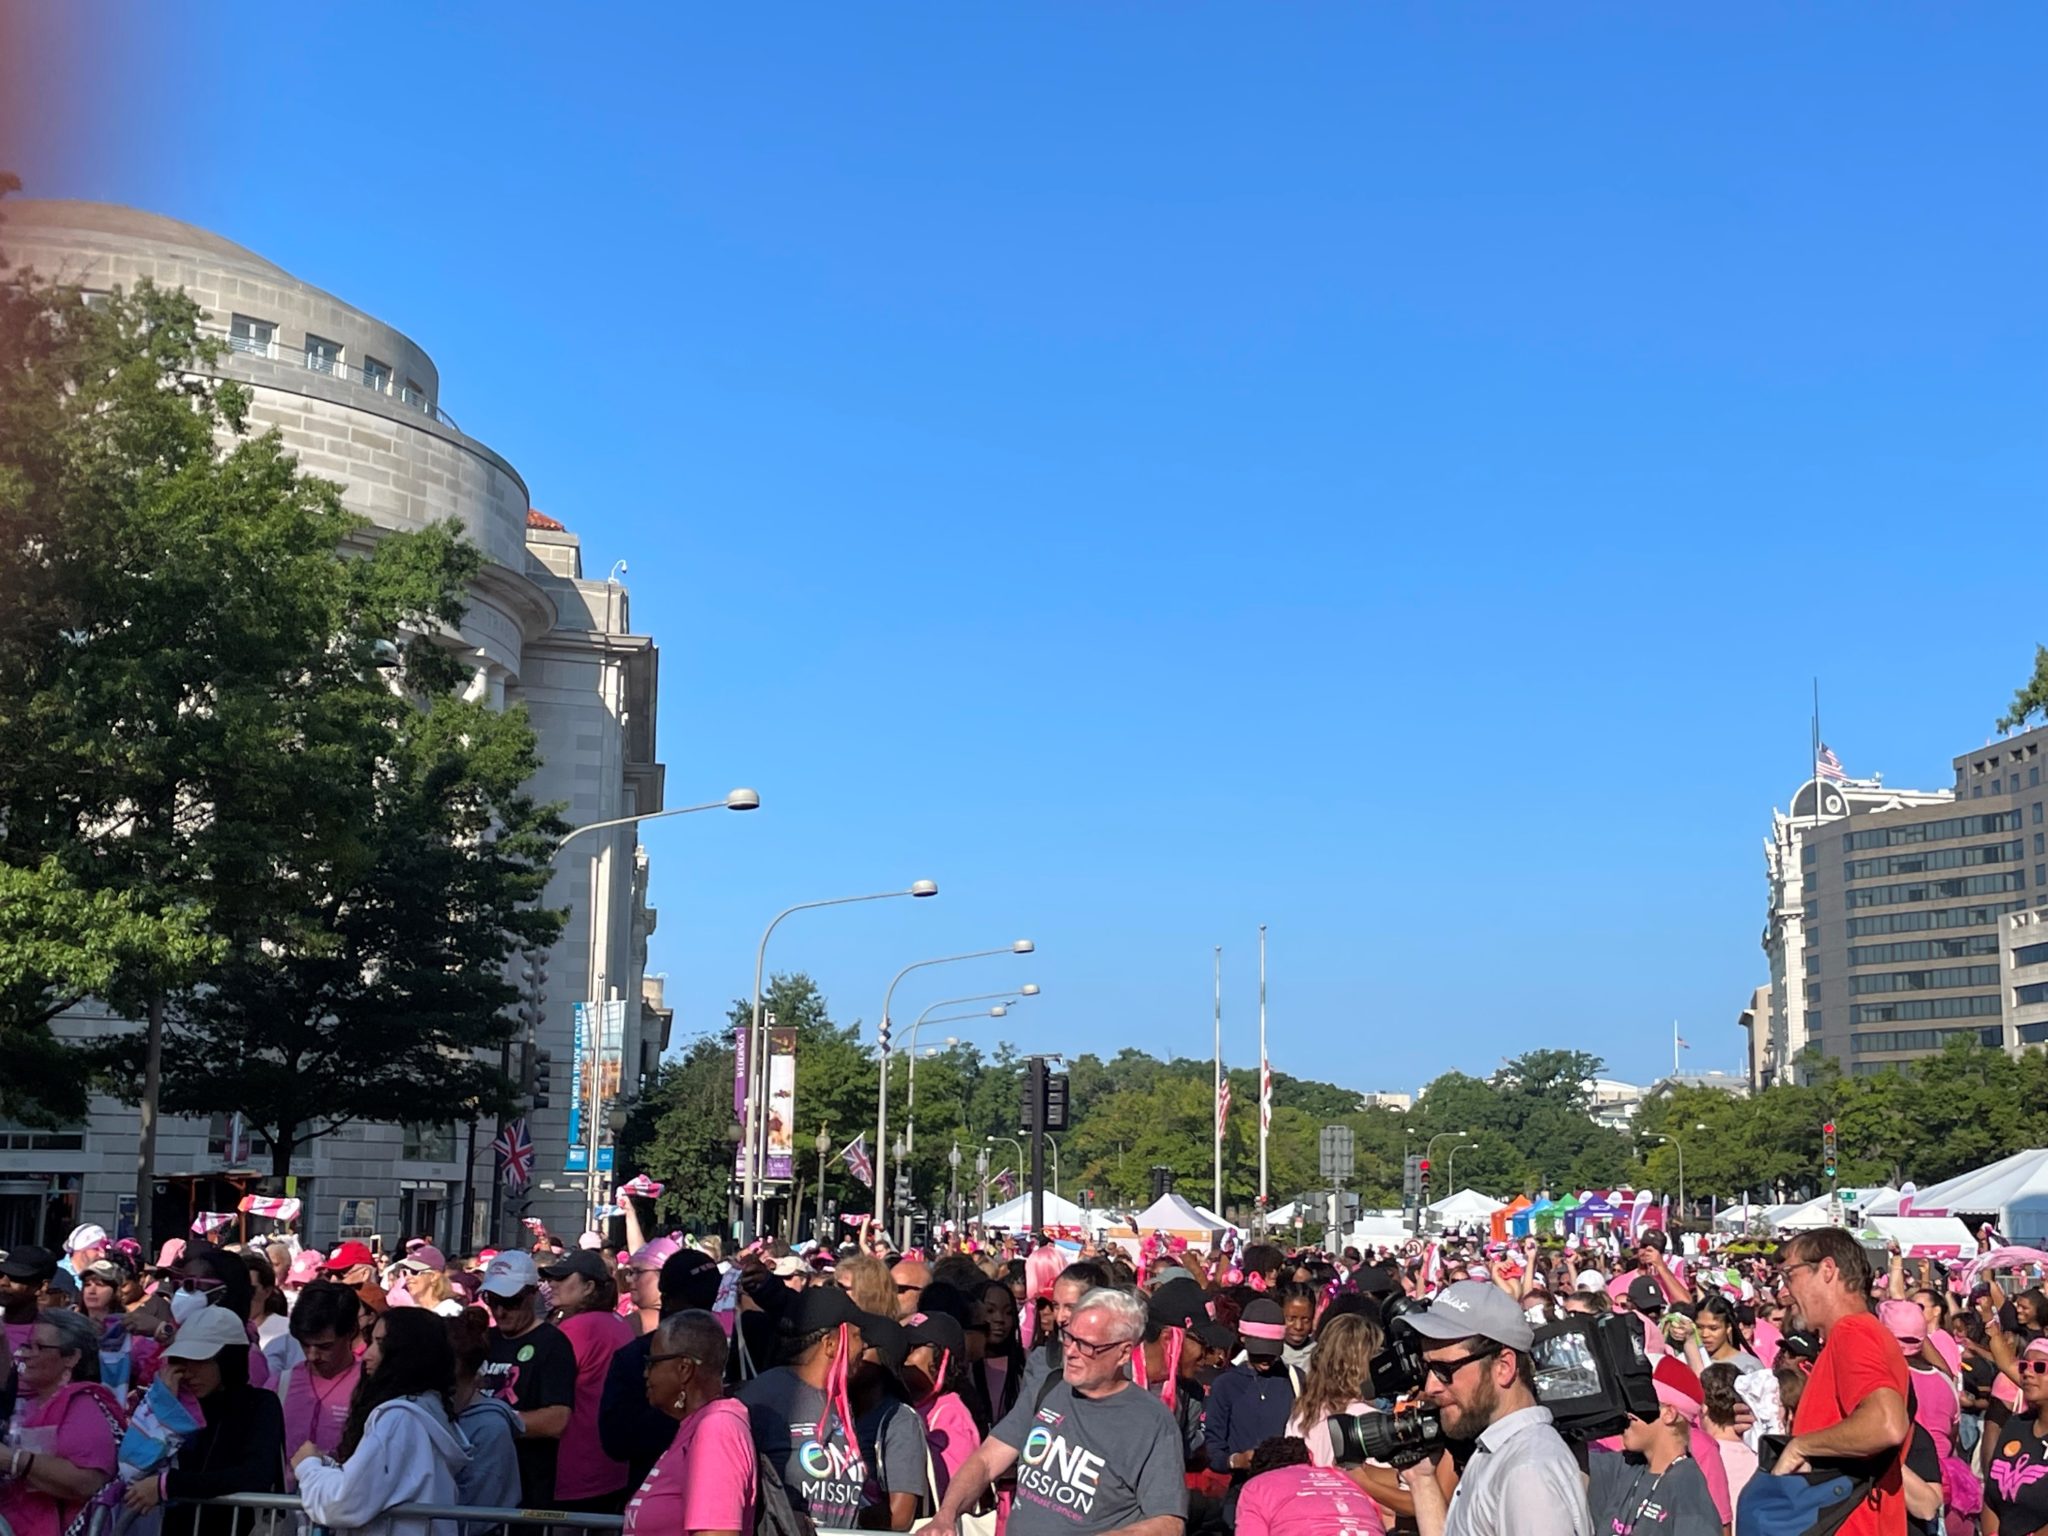 thousands of people wearing pink t shirts gathered in DC's Freedom Plaza for Susan G Komen Breast Cancer walk